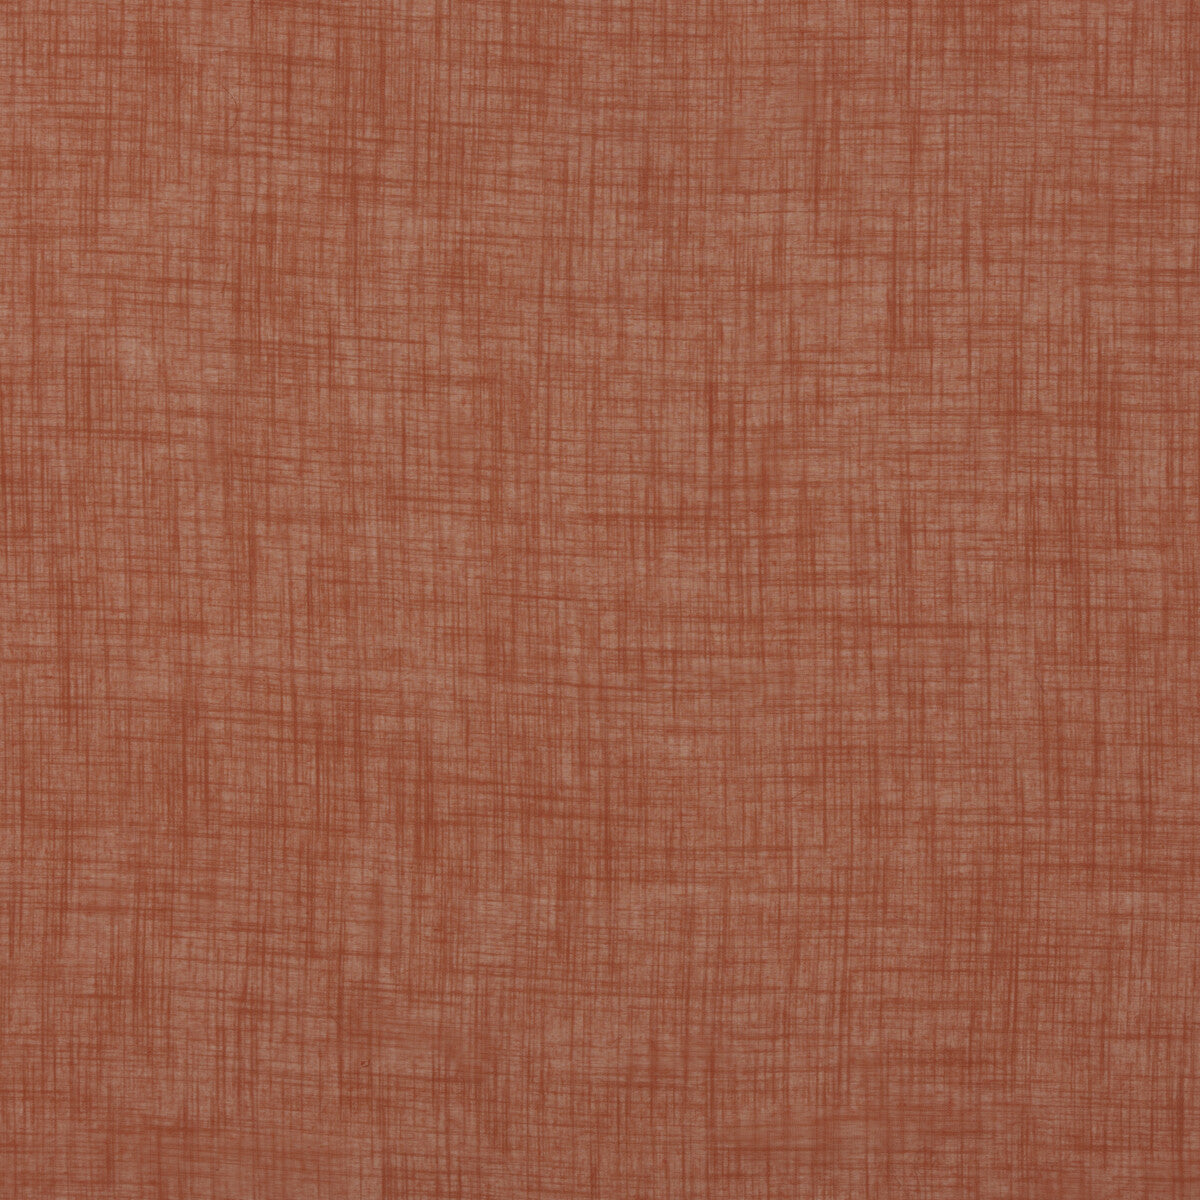 Kelso fabric in spice color - pattern PV1005.330.0 - by Baker Lifestyle in the Notebooks collection